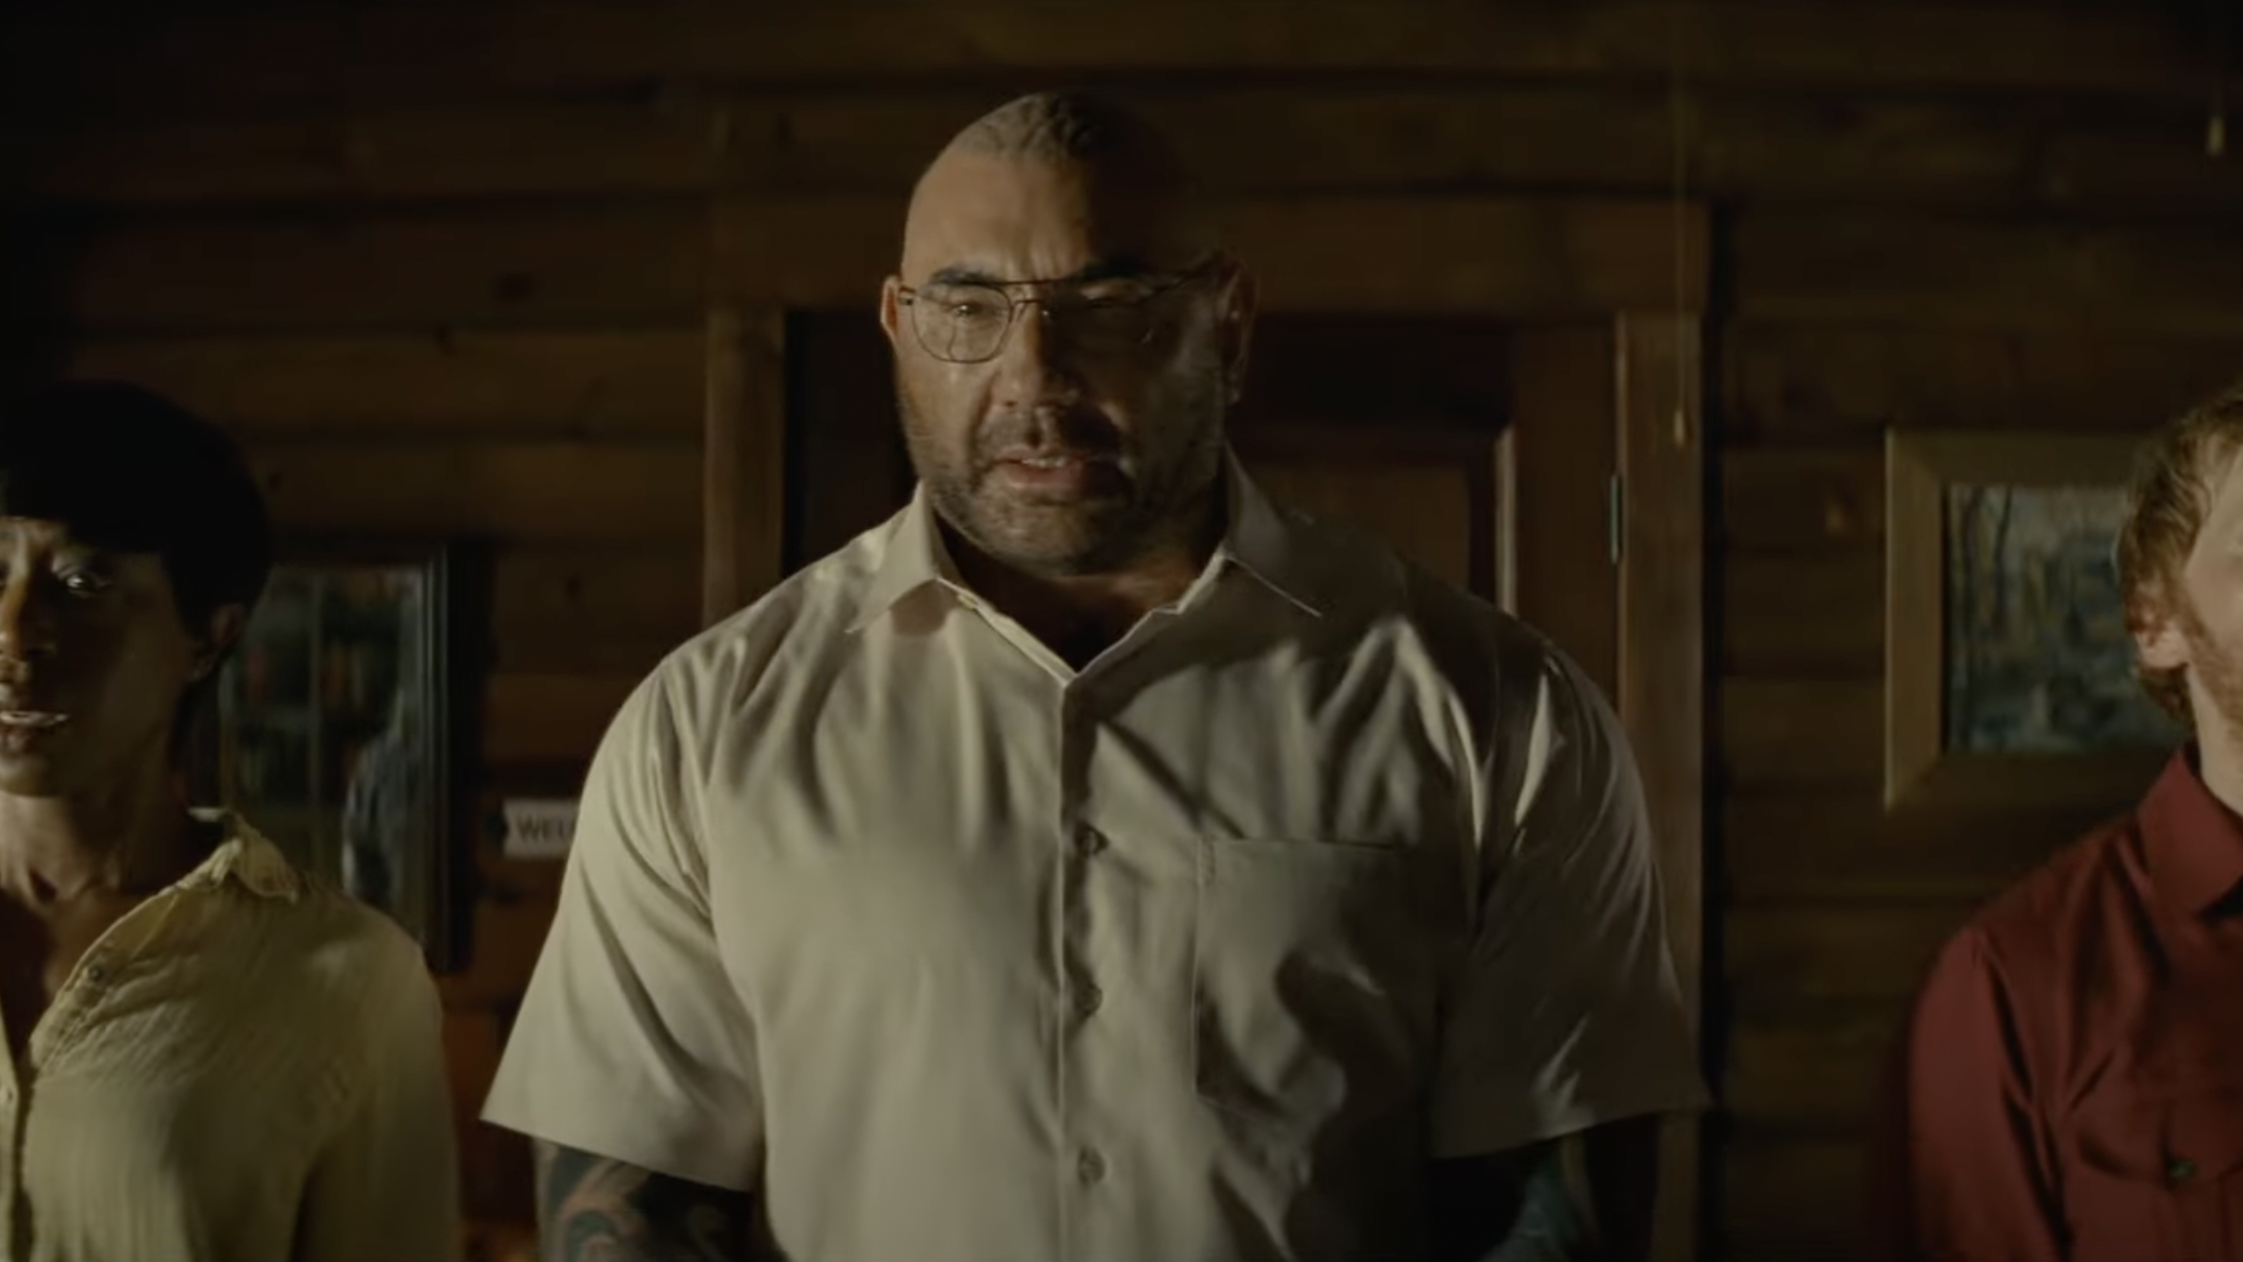 It’s the end of the trip as we know it in the trailer for M. Night Shyamalan’s Knock At The Cabin